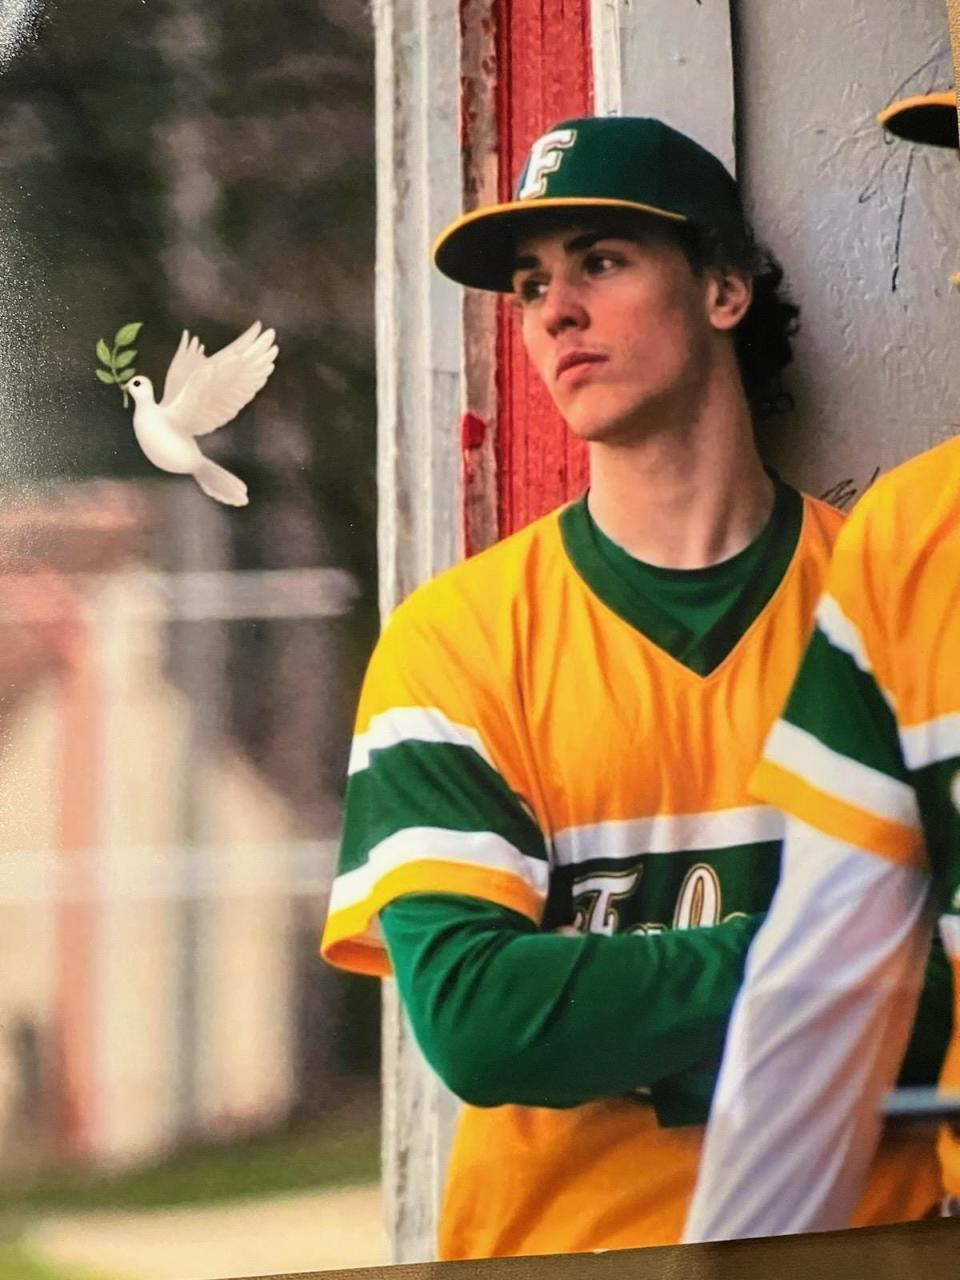 Ethan Liming, who played baseball and football at Firestone high school, died June 2 in the parking lot of the I Promise School.